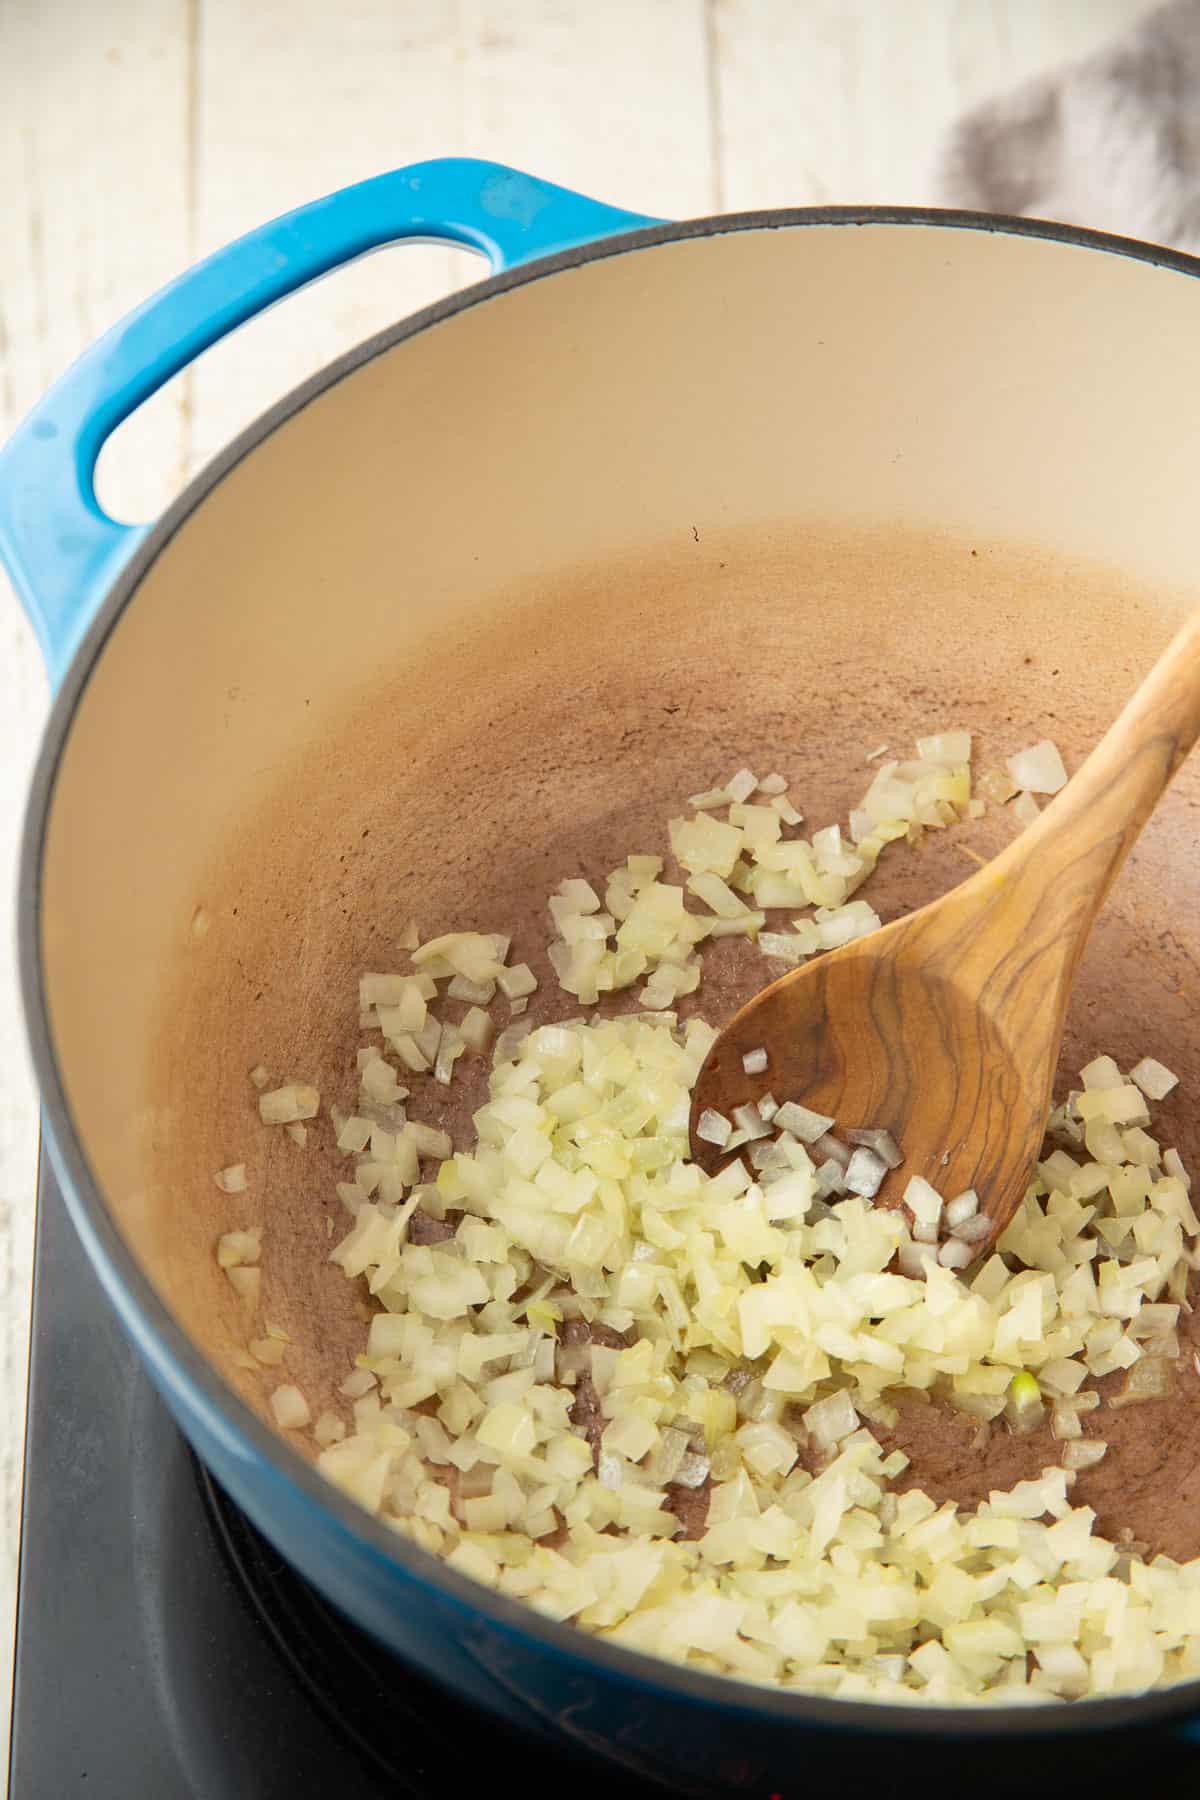 Diced onions cooking in a pot.